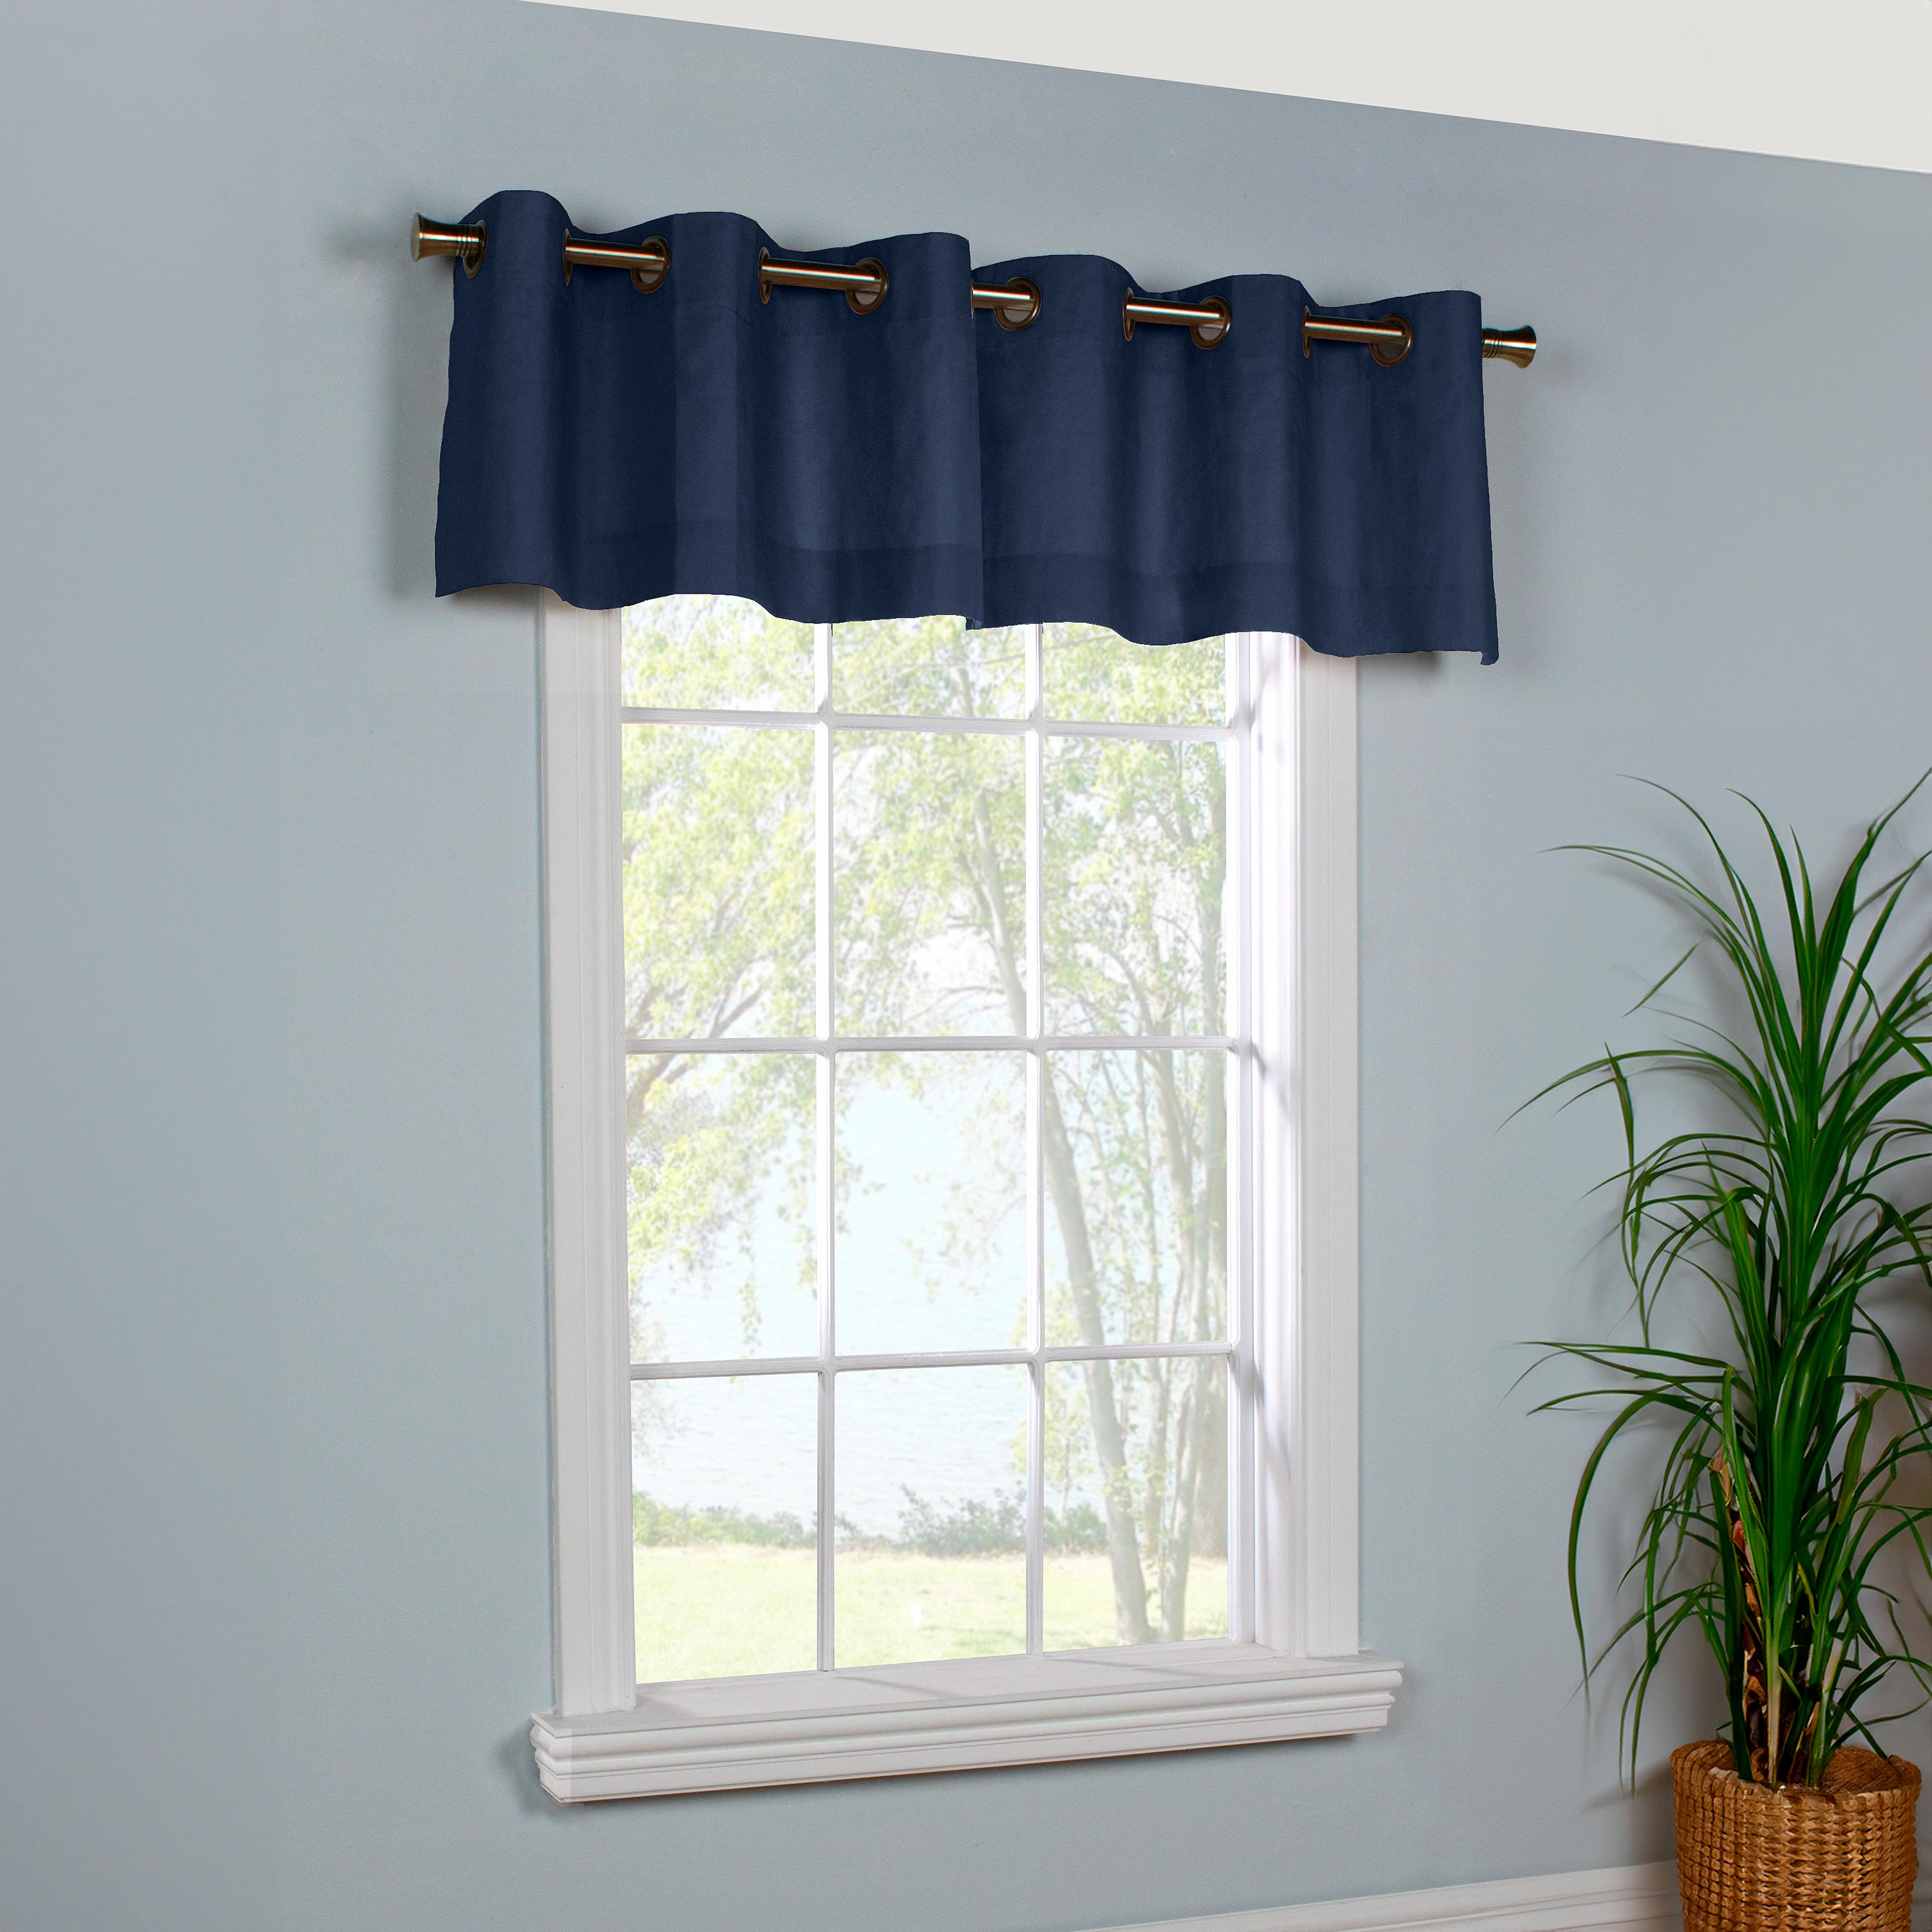 84"L Double-Width Thermalogic Energy Efficient Insulated Solid Grommet-Top Curtain Pair